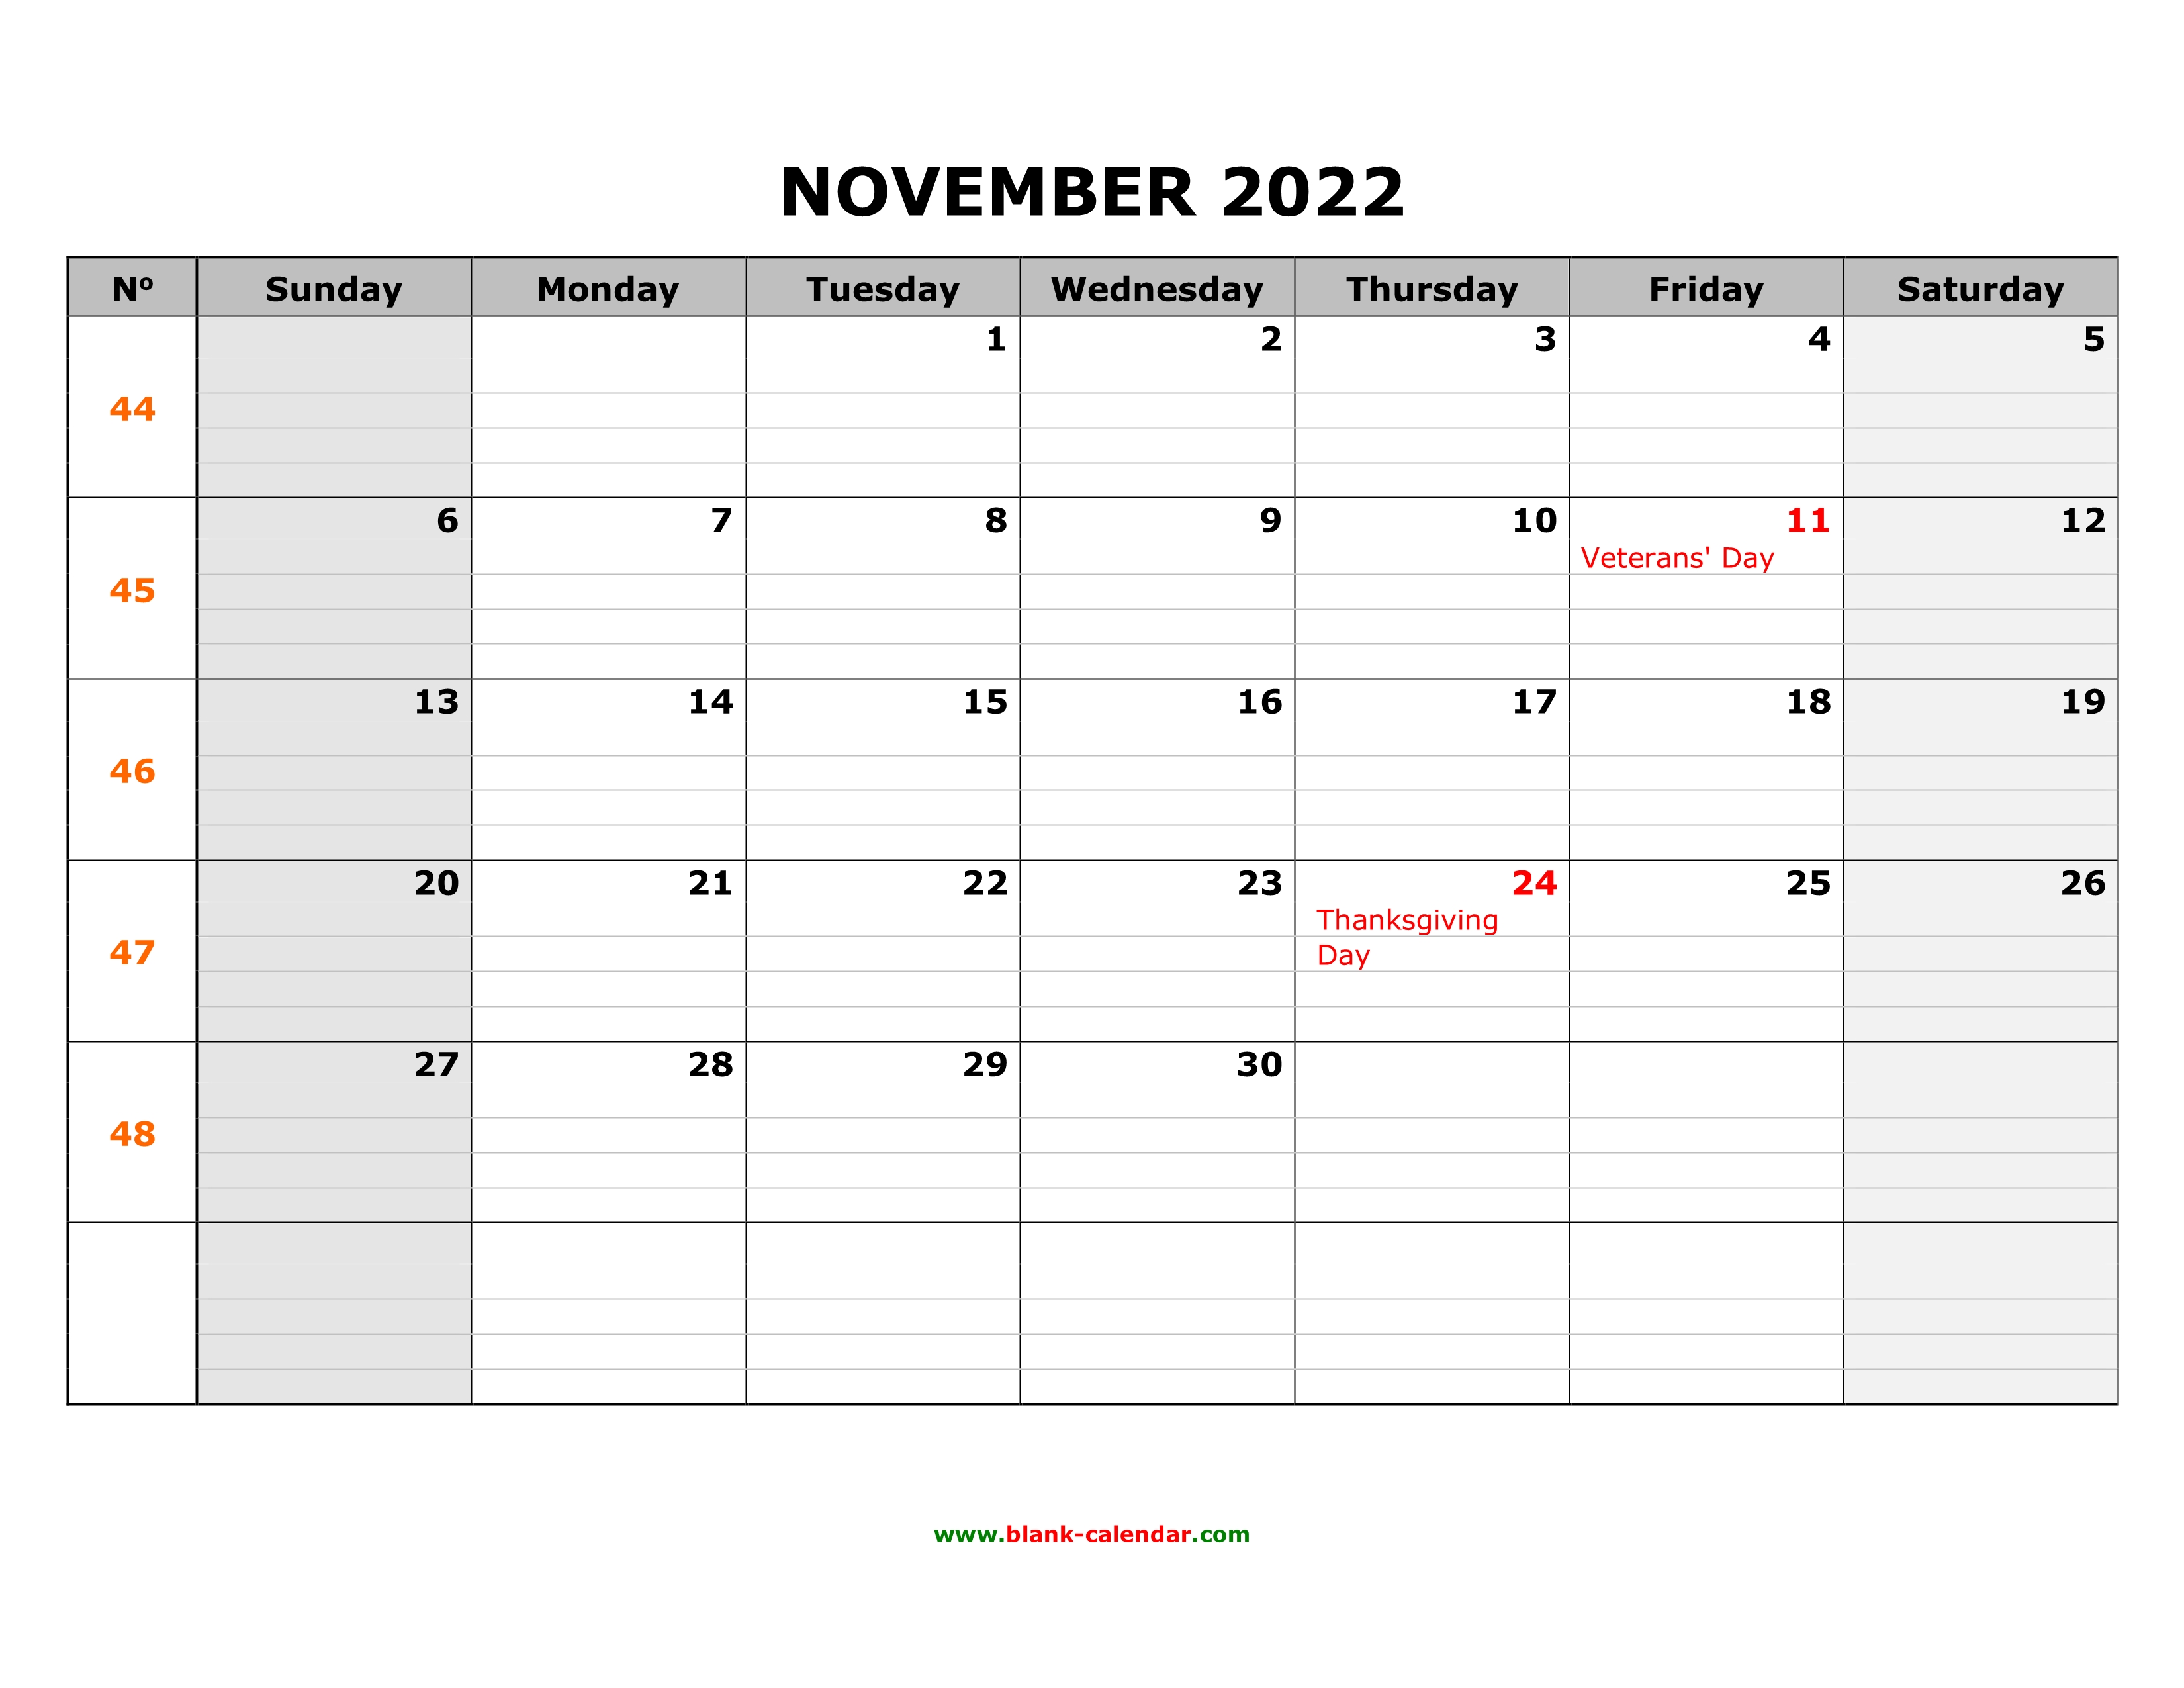 free-download-printable-november-2022-calendar-large-box-grid-space-for-notes